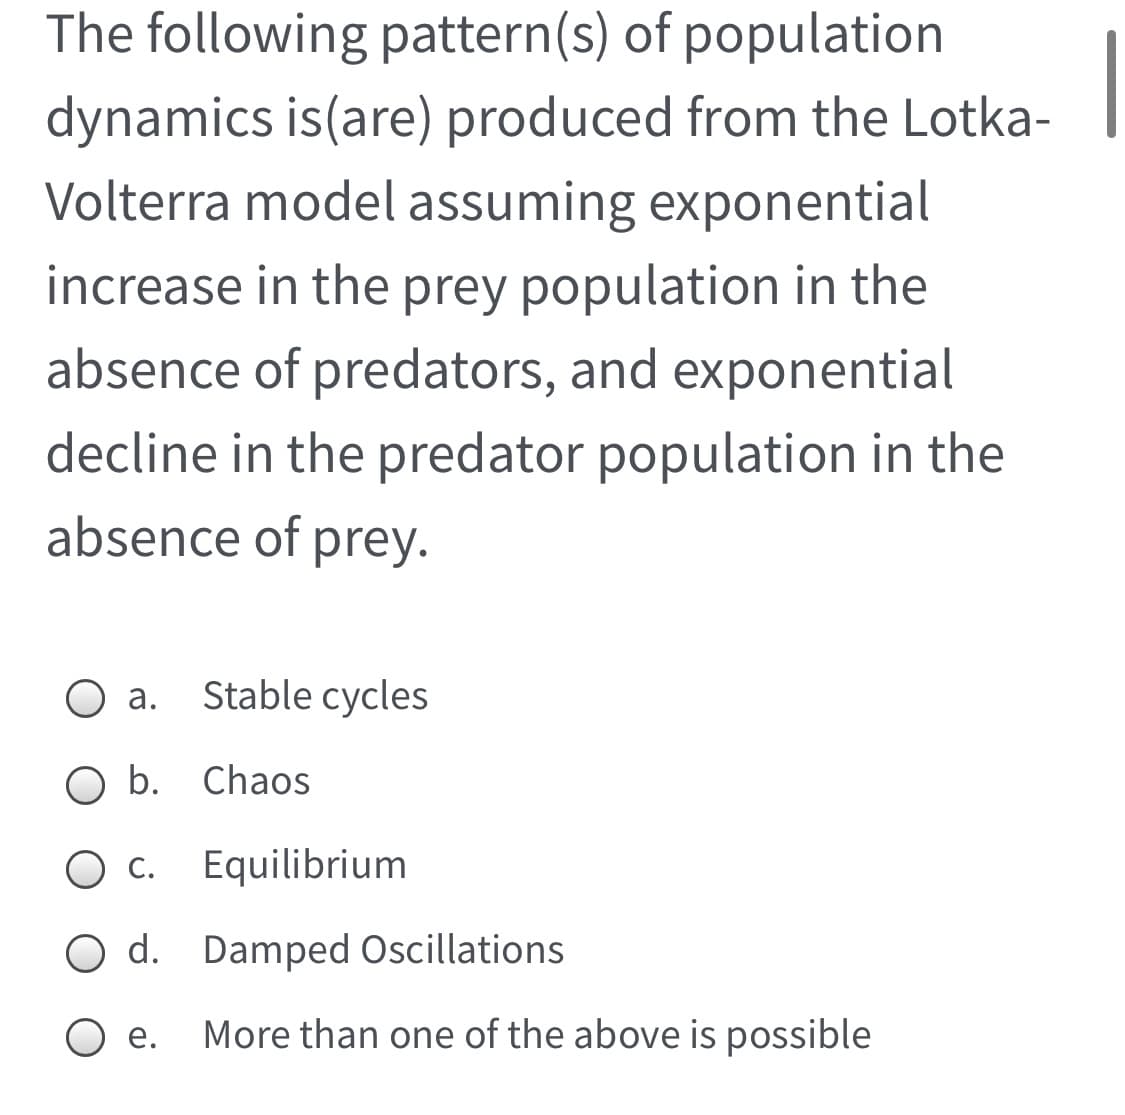 The following pattern(s) of population
dynamics is(are) produced from the Lotka-
Volterra model assuming exponential
increase in the prey population in the
absence of predators, and exponential
decline in the predator population in the
absence of prey.
а.
Stable cycles
b. Chaos
O c.
Equilibrium
O d. Damped Oscillations
O e.
More than one of the above is possible
